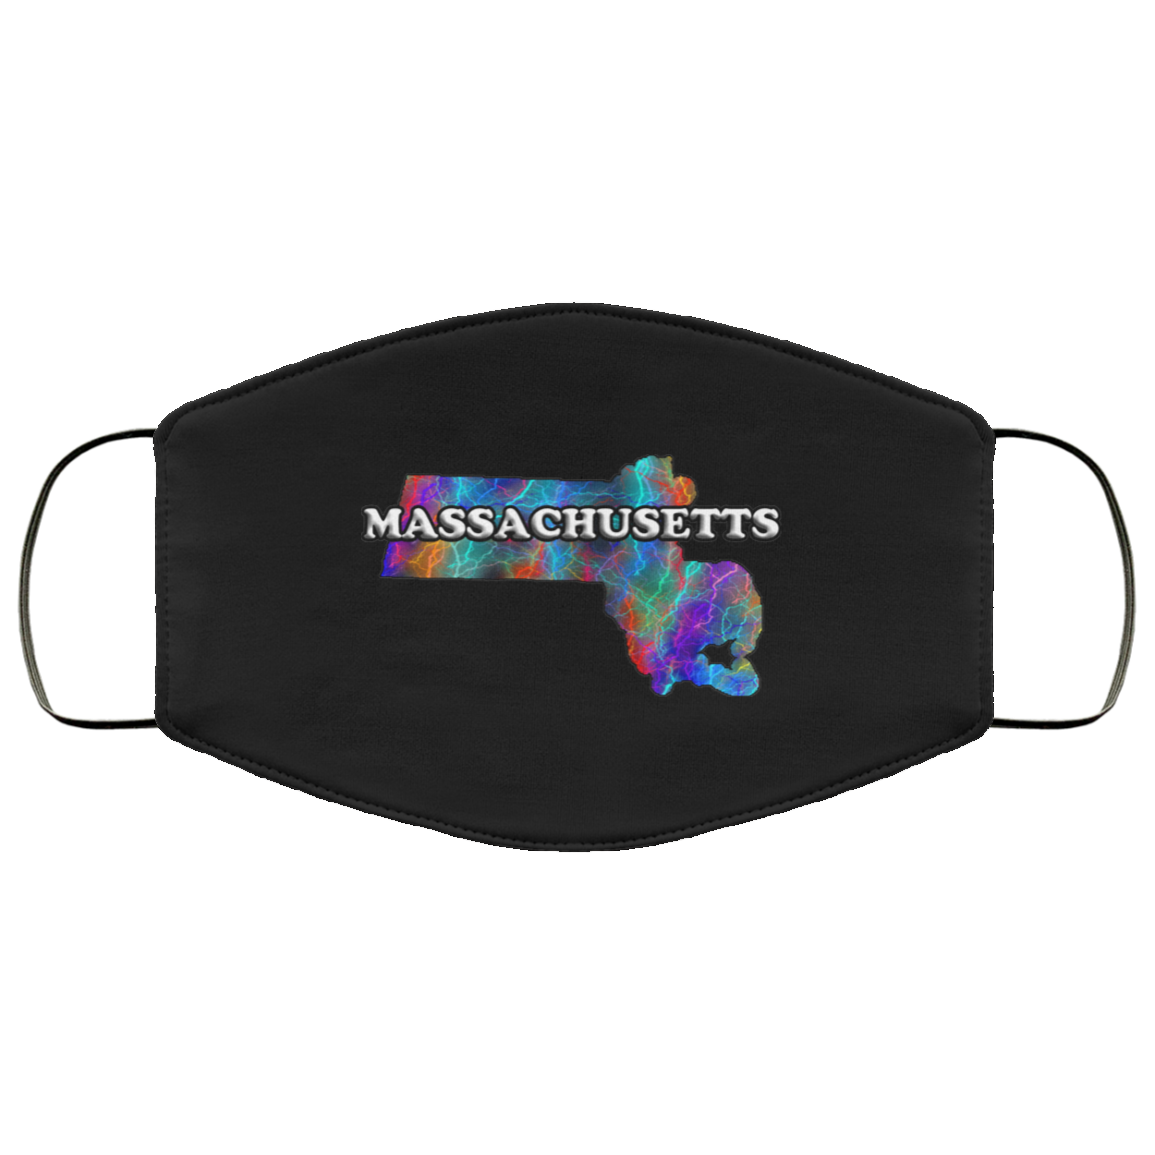 Massachusetts 2 Layer Protective Face Mask